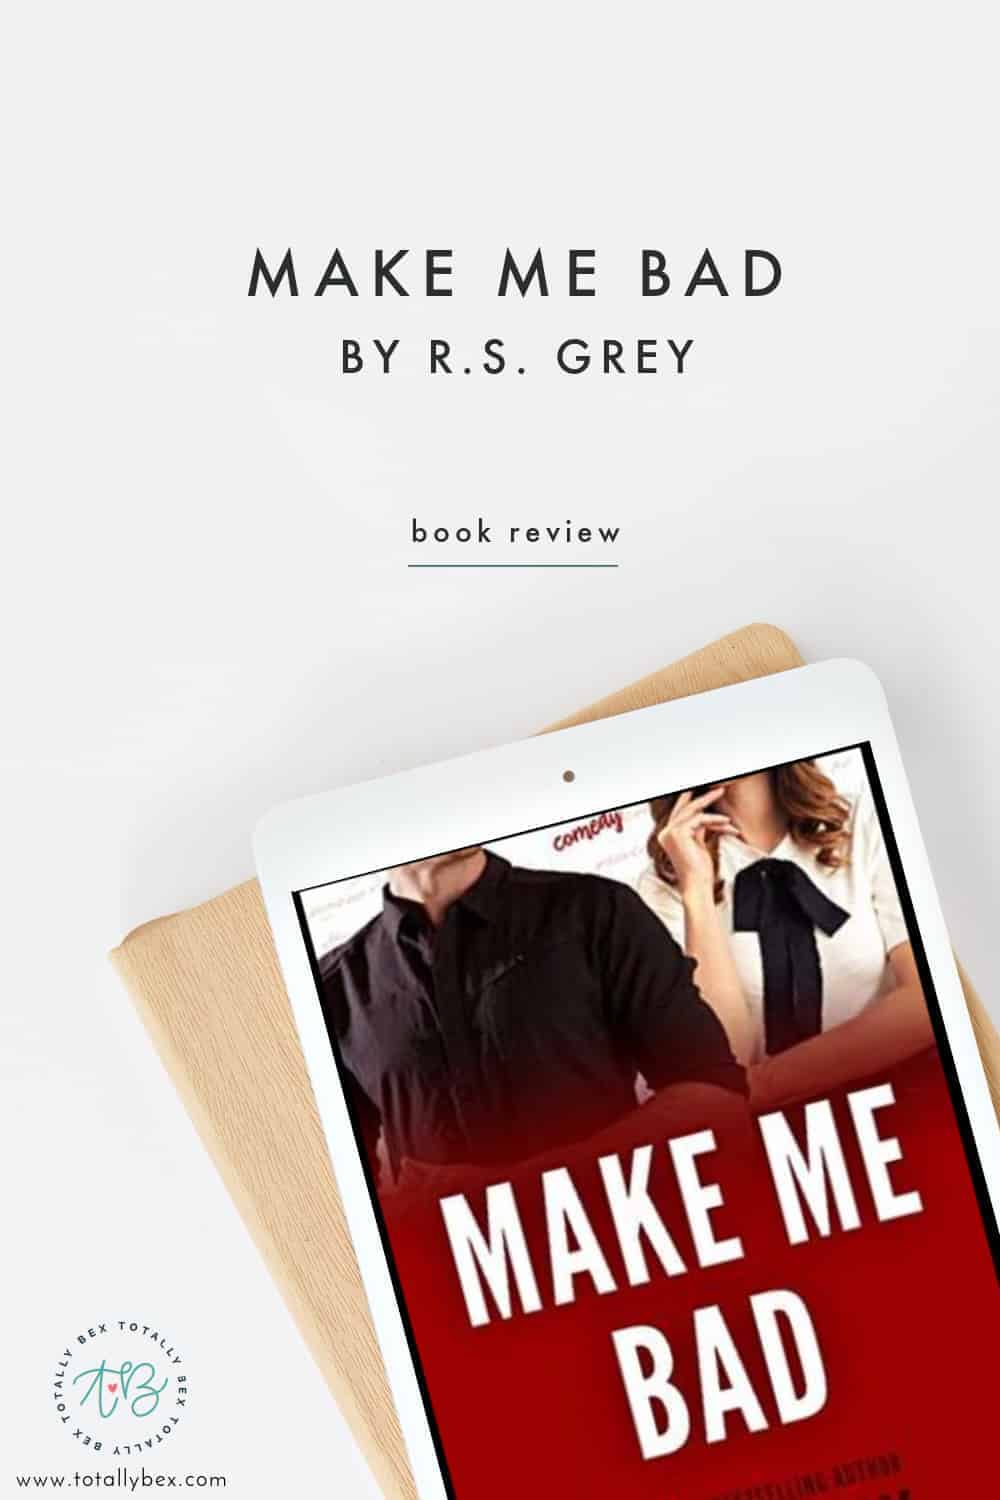 Make Me Bad by RS Grey is a standalone romantic comedy with a slow burn, opposites attract, forbidden relationship. So adorable and the opposite of bad!